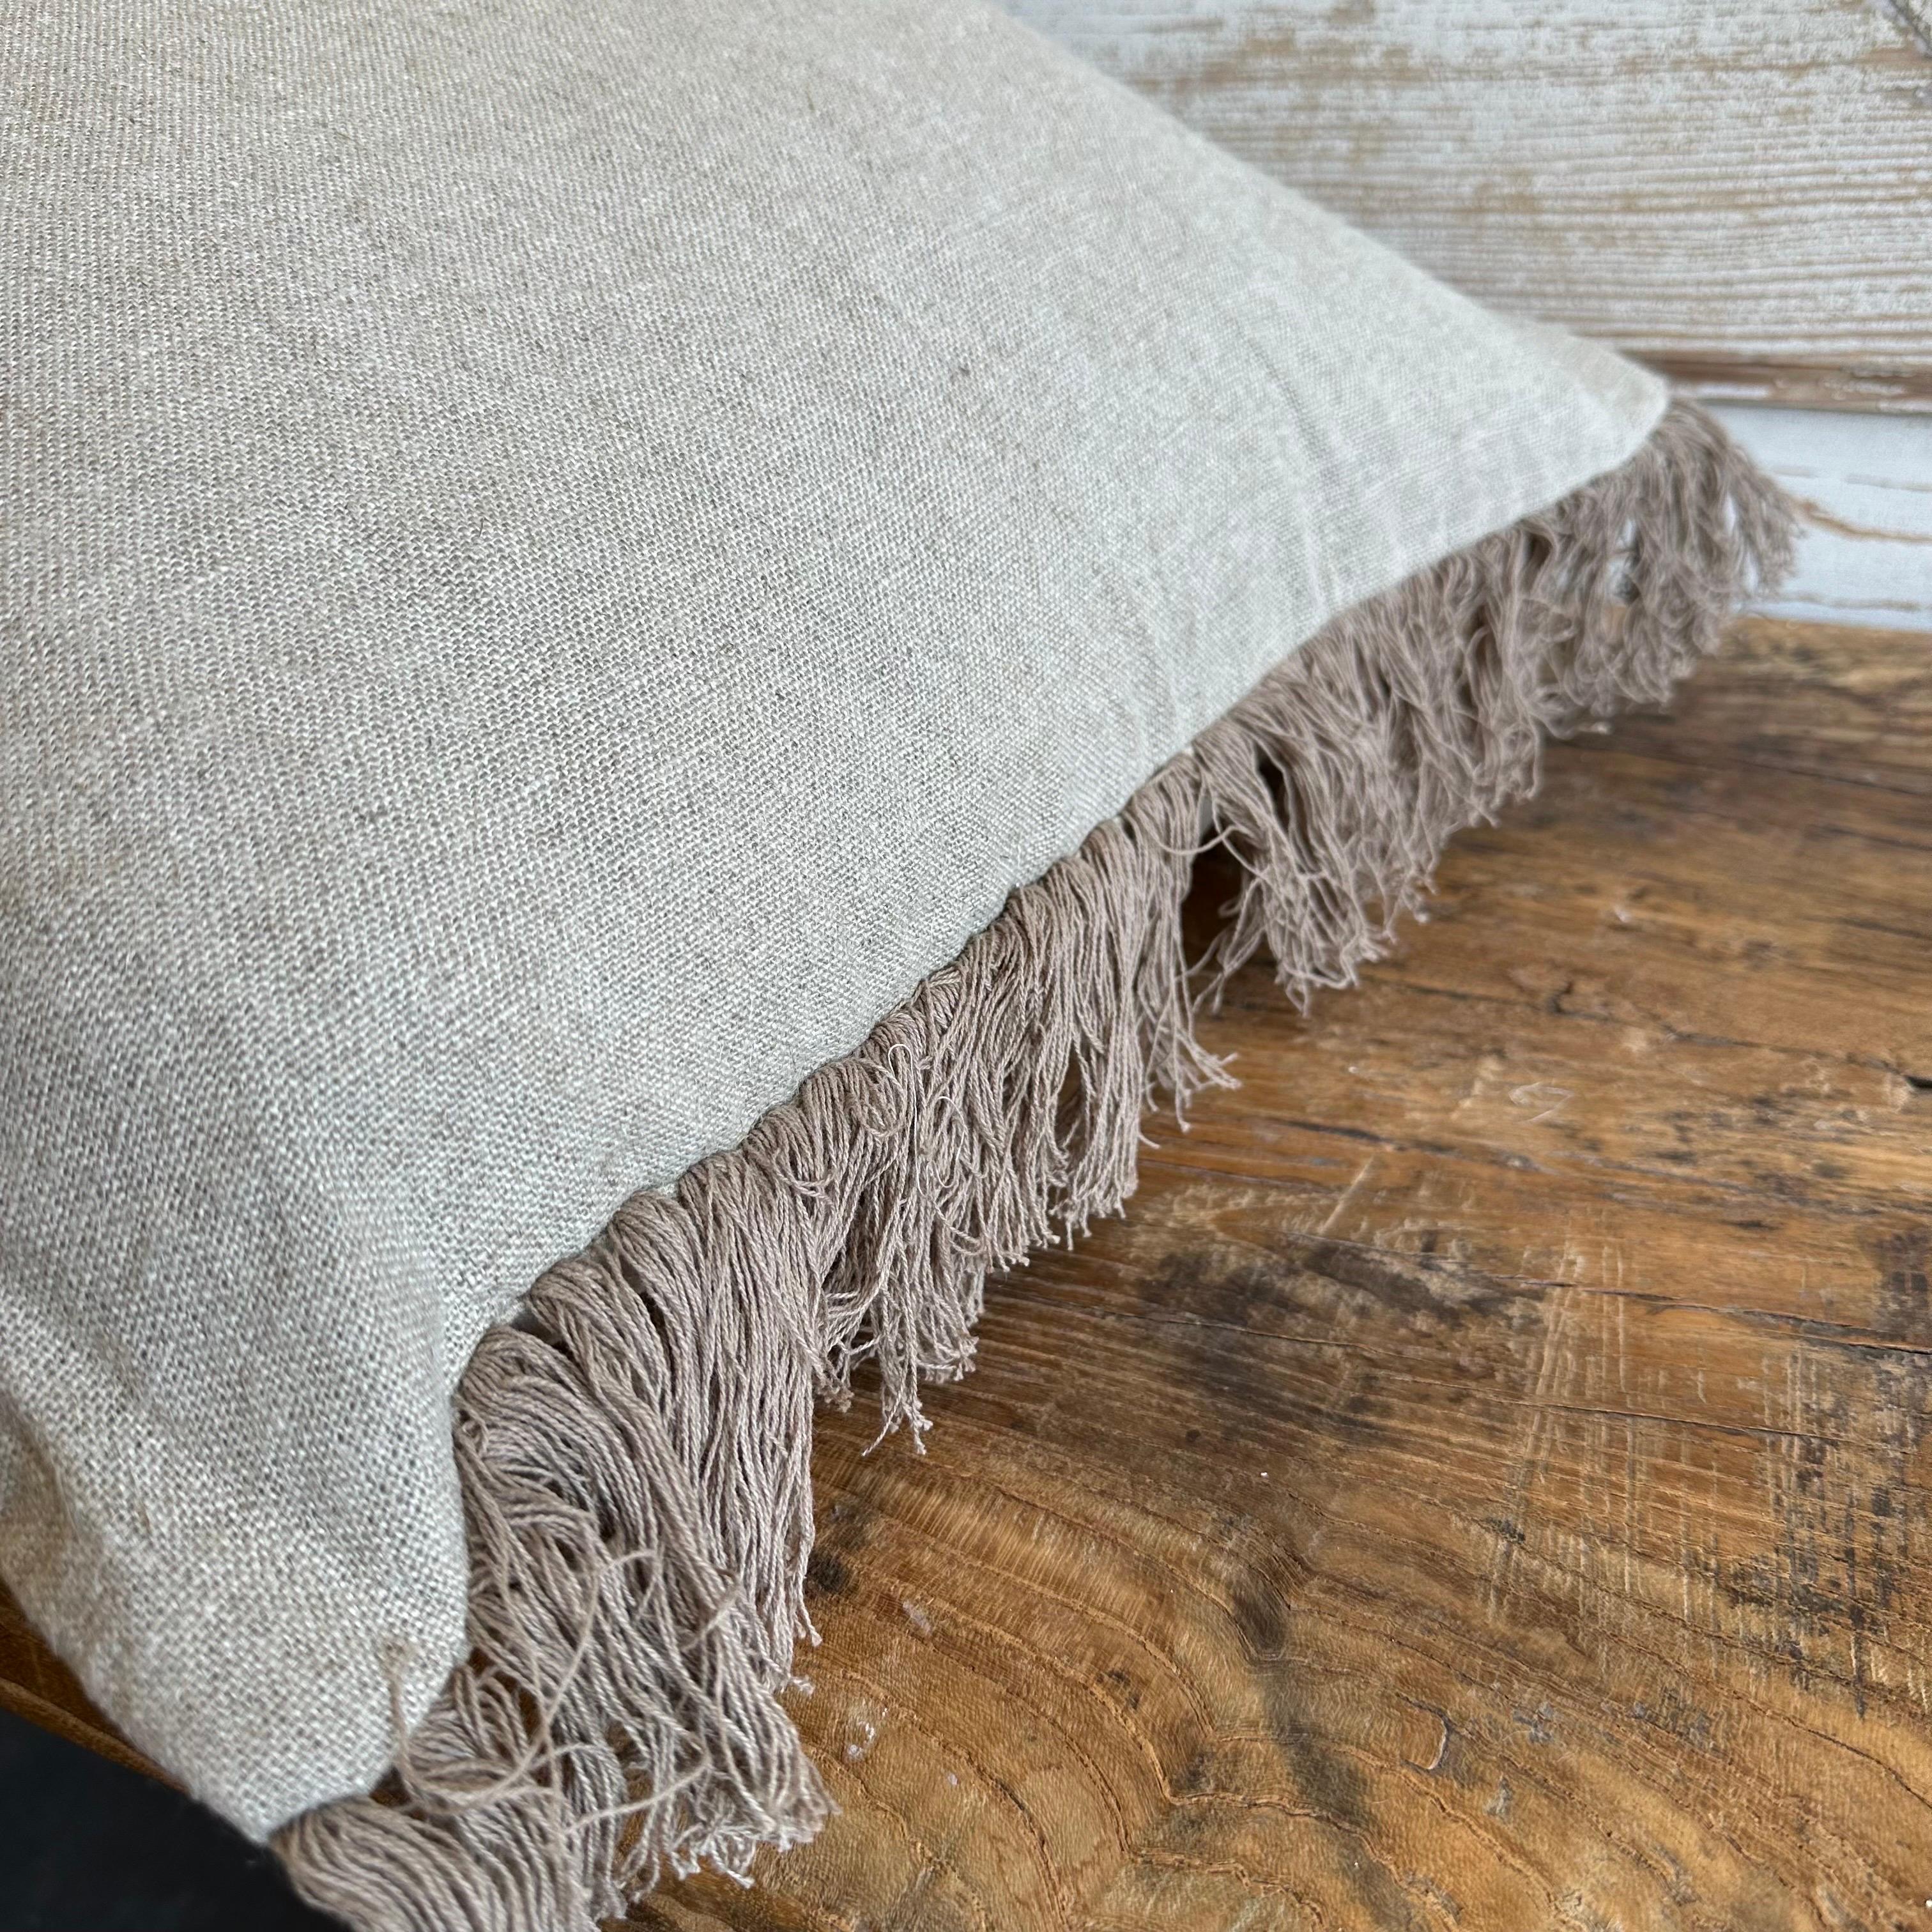 Made in France
Natural linen lumbar, XL king size with zipper closure.
Down insert not included. Please choose insert upon check out.
Size: 21x43x8
Natural linen face with fringe edges, the backing is a natural cotton fabric that coordinates